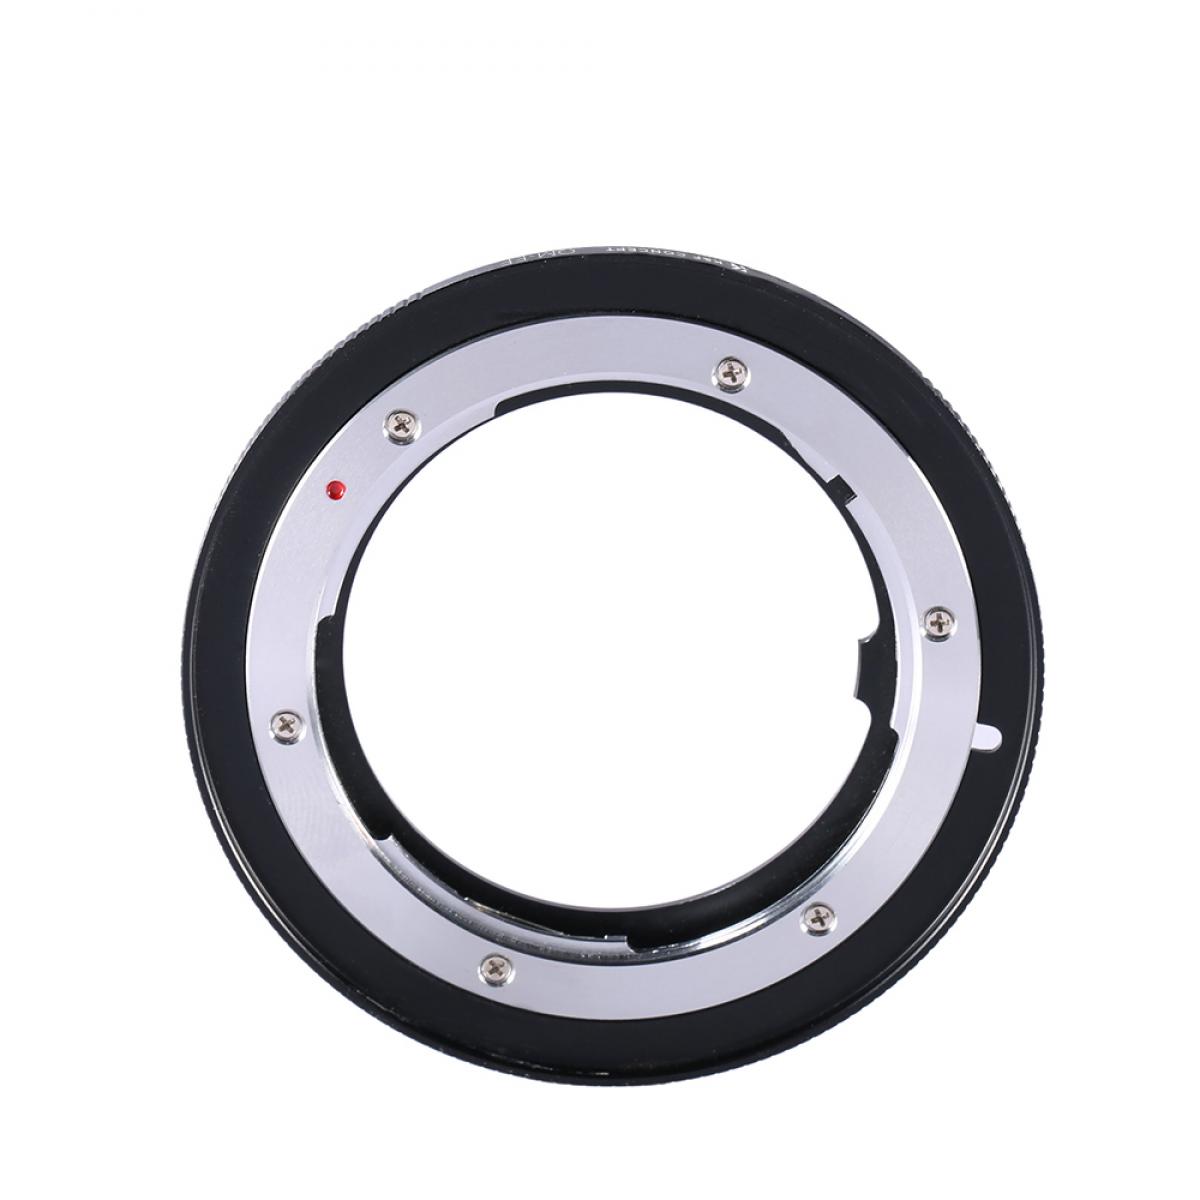 K&F Concept M16131 Olympus OM Lenses to Canon EF Lens Mount Adapter